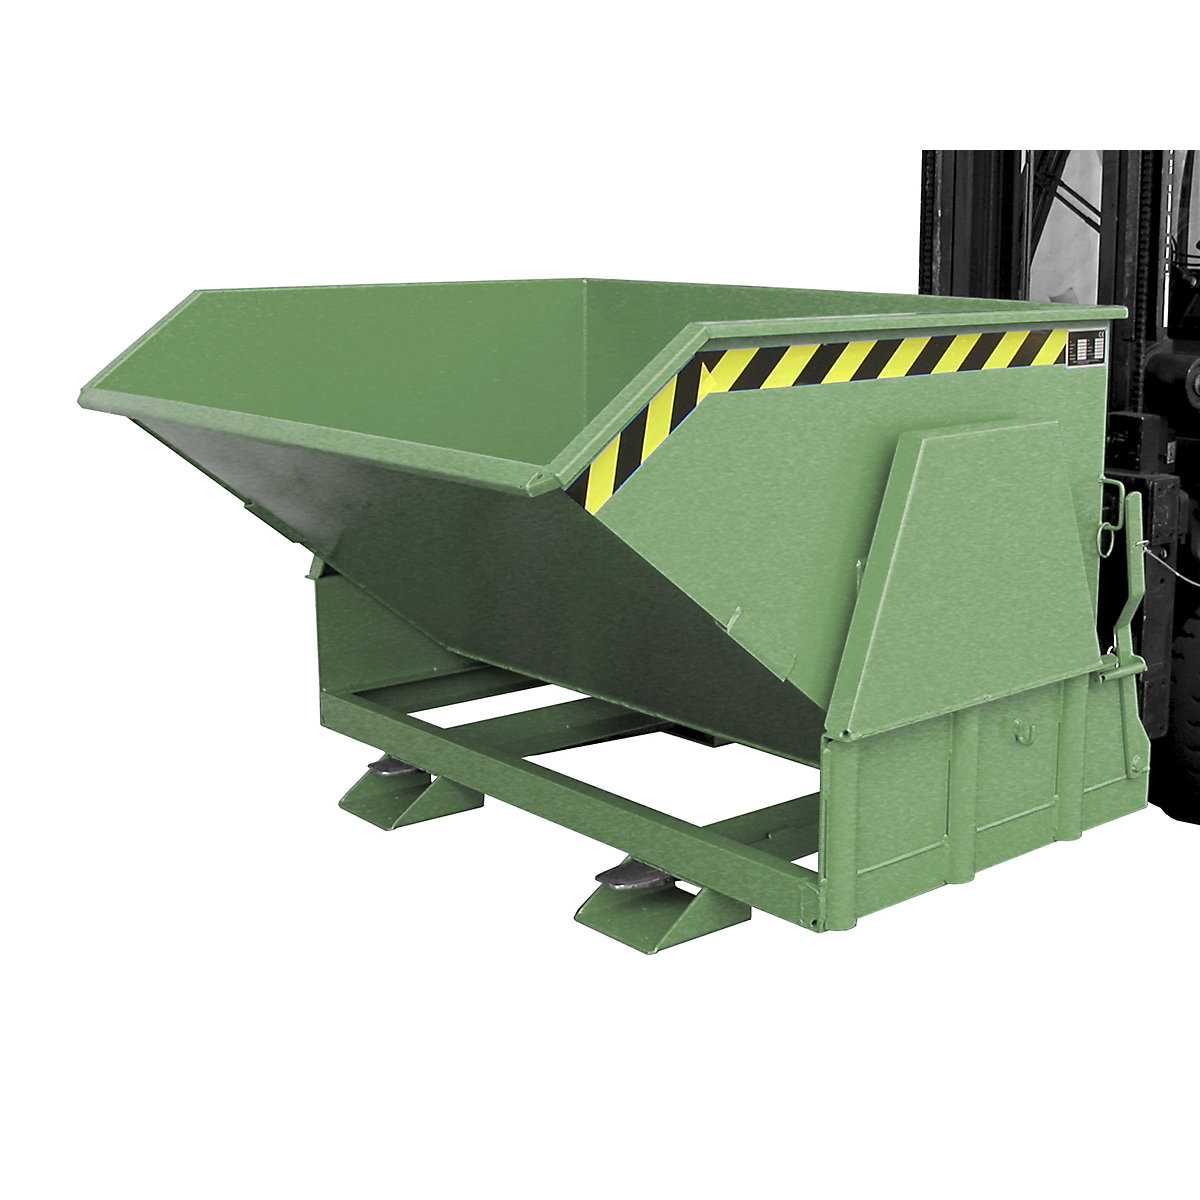 Tilting skip, standard overall height, without wheels – eurokraft pro, capacity 1.2 m³, painted green RAL 6011-7